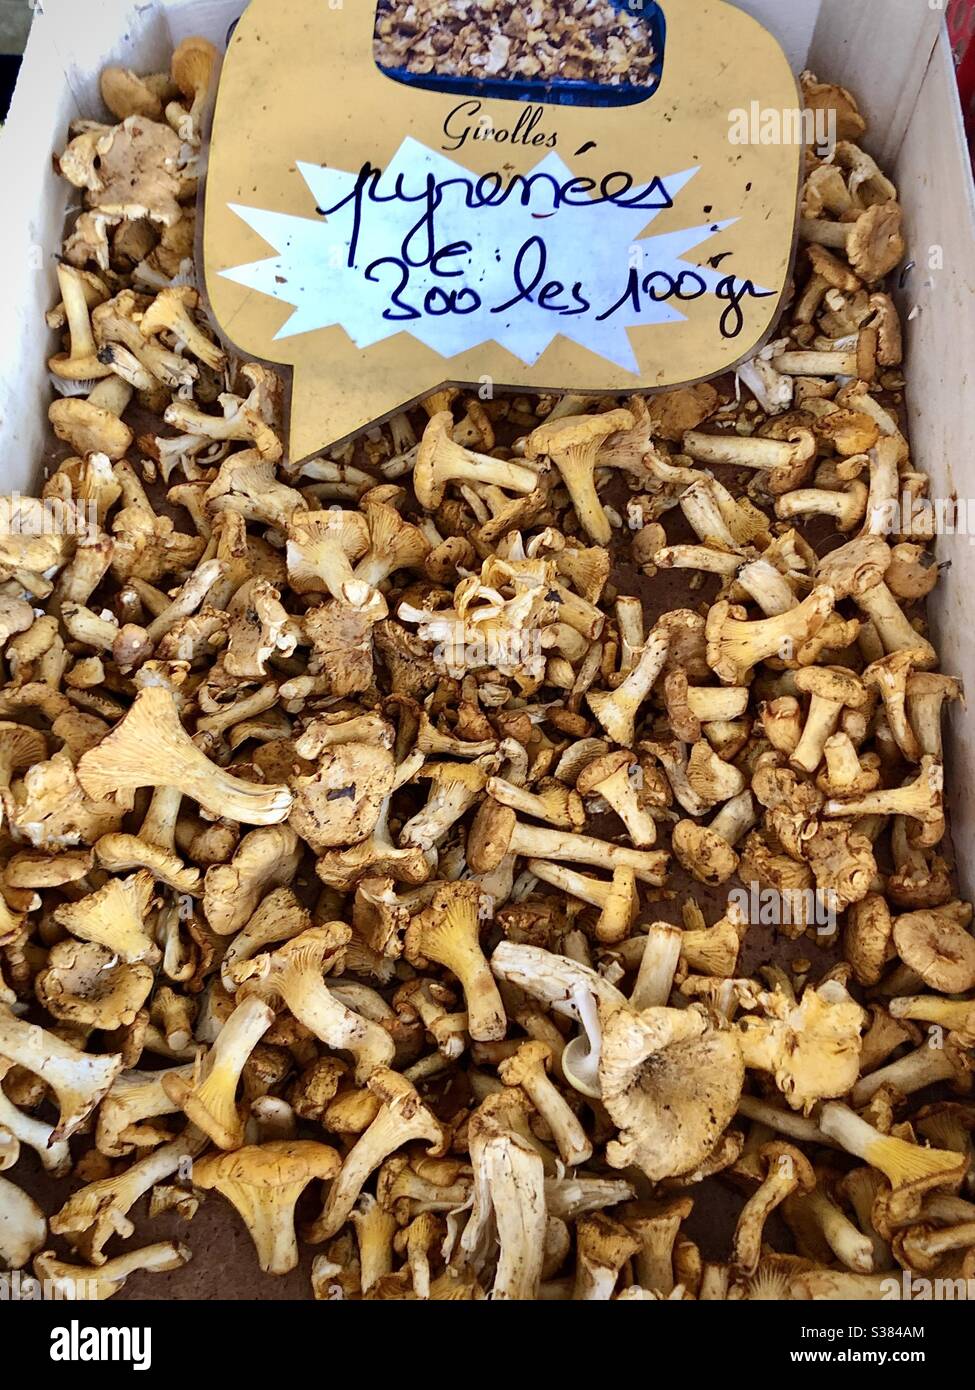 Girolles de Pyrénées mushrooms for sale on French market stall. Stock Photo